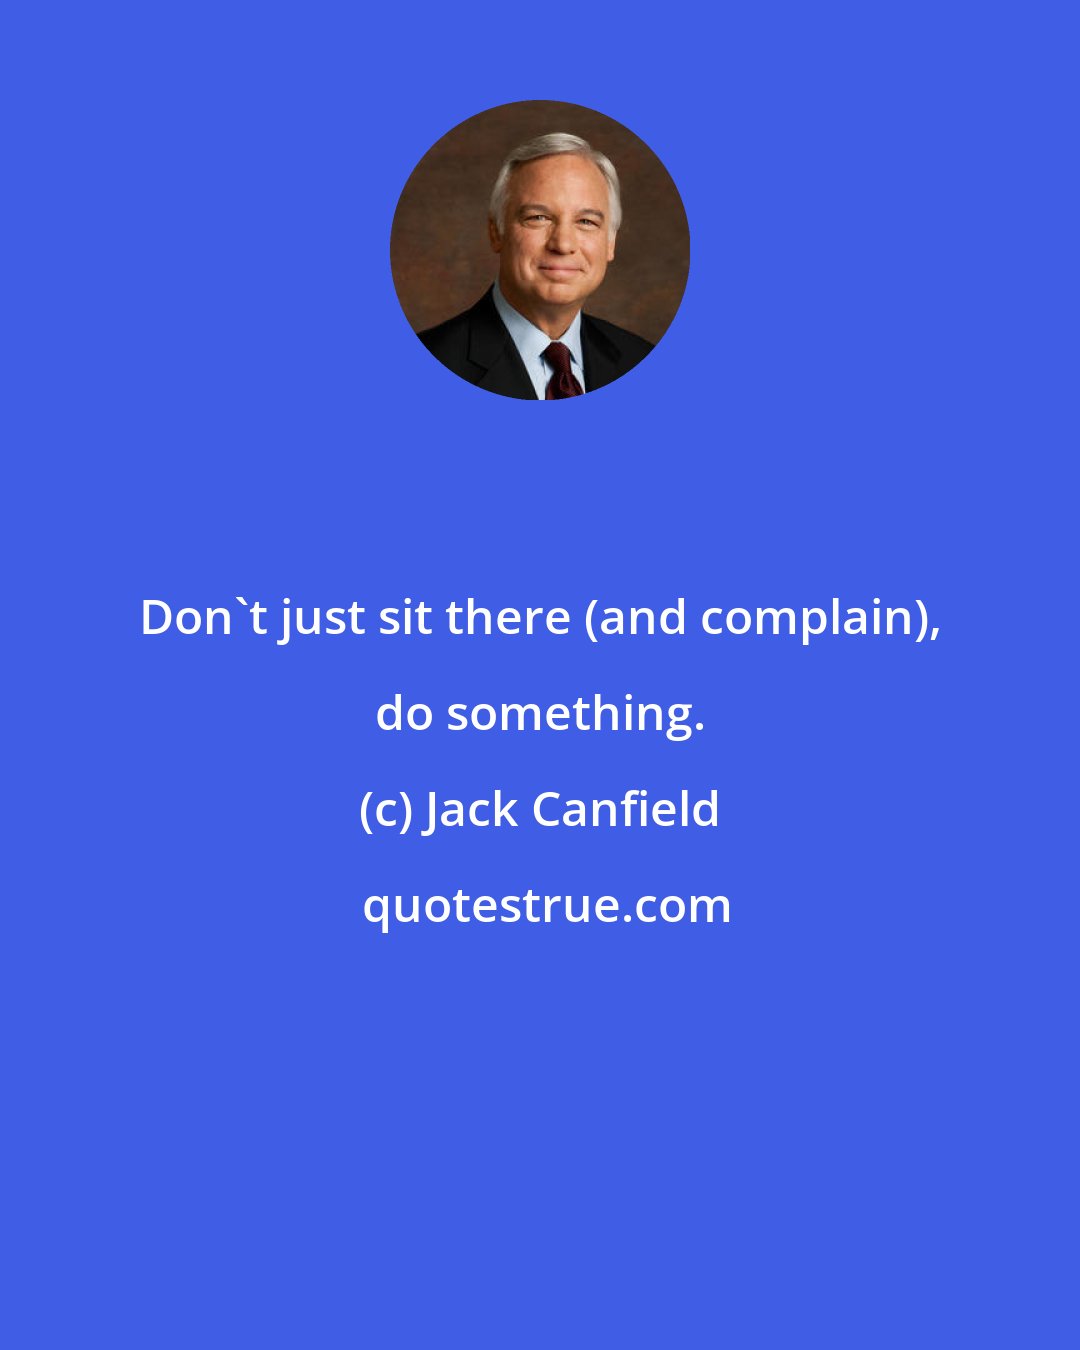 Jack Canfield: Don't just sit there (and complain), do something.